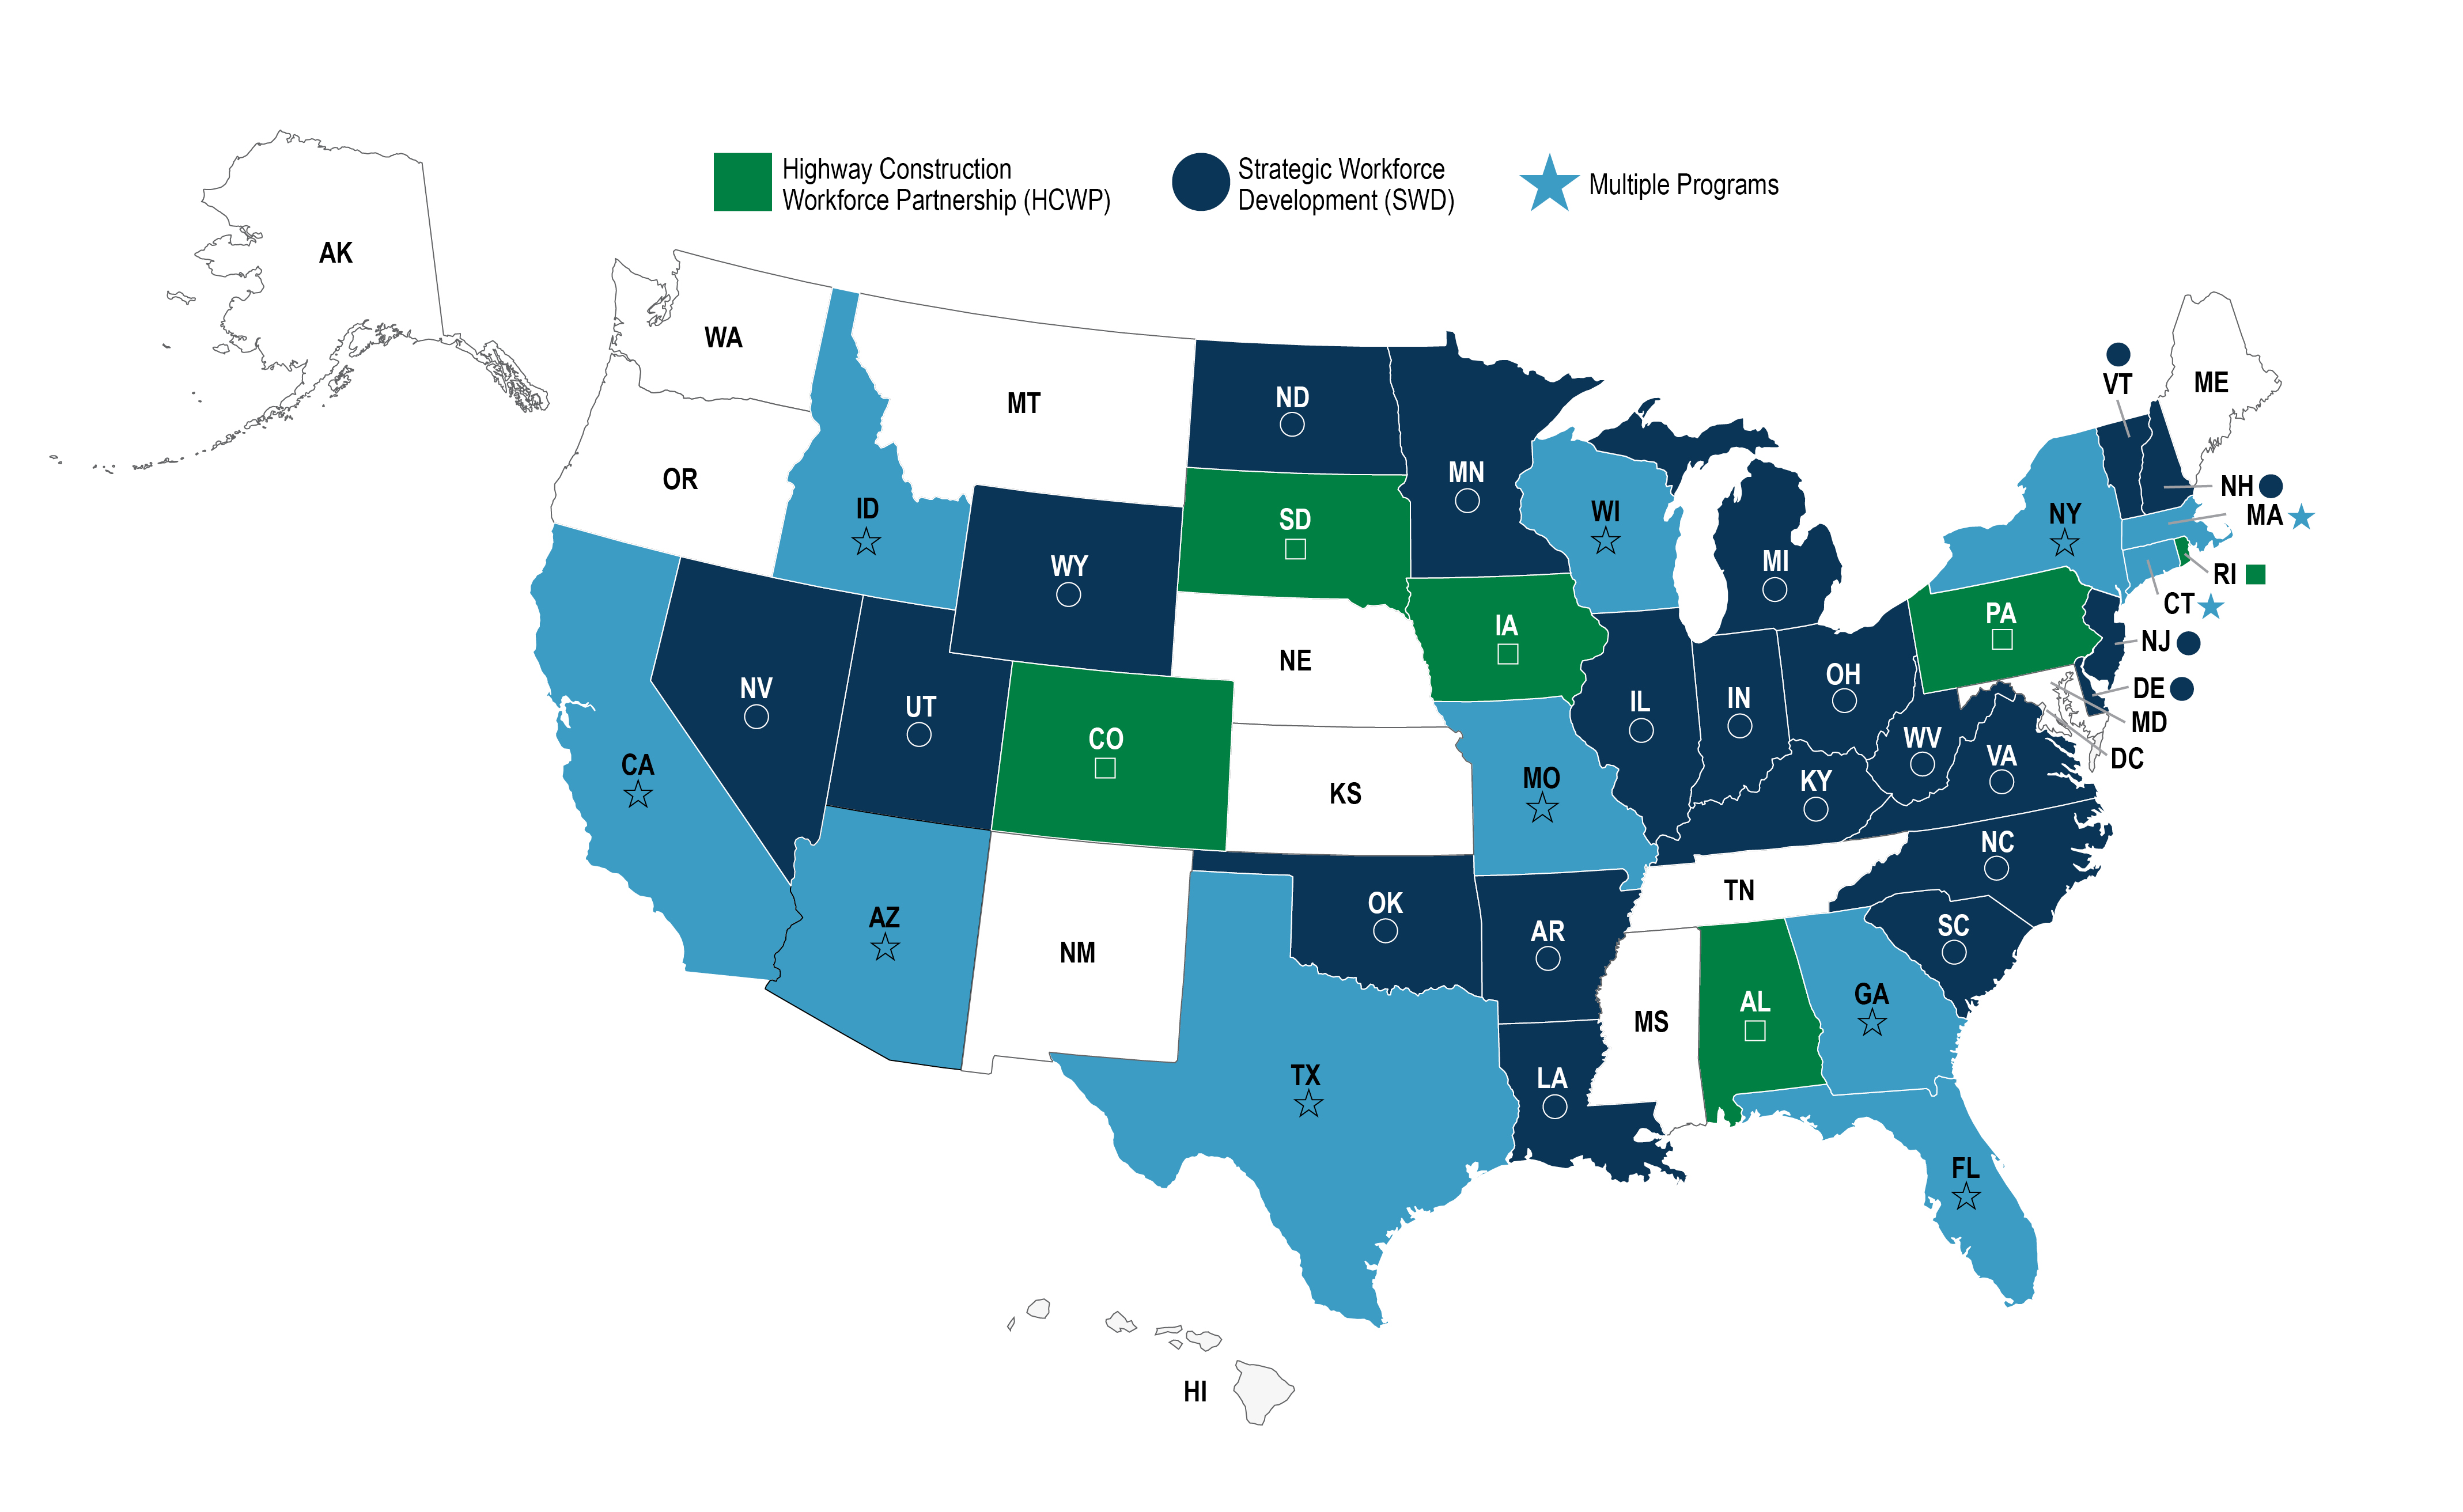 Map denoting which states are part of the Strategic Workforce Development, Highway Construction Workforce Partnership, or both.